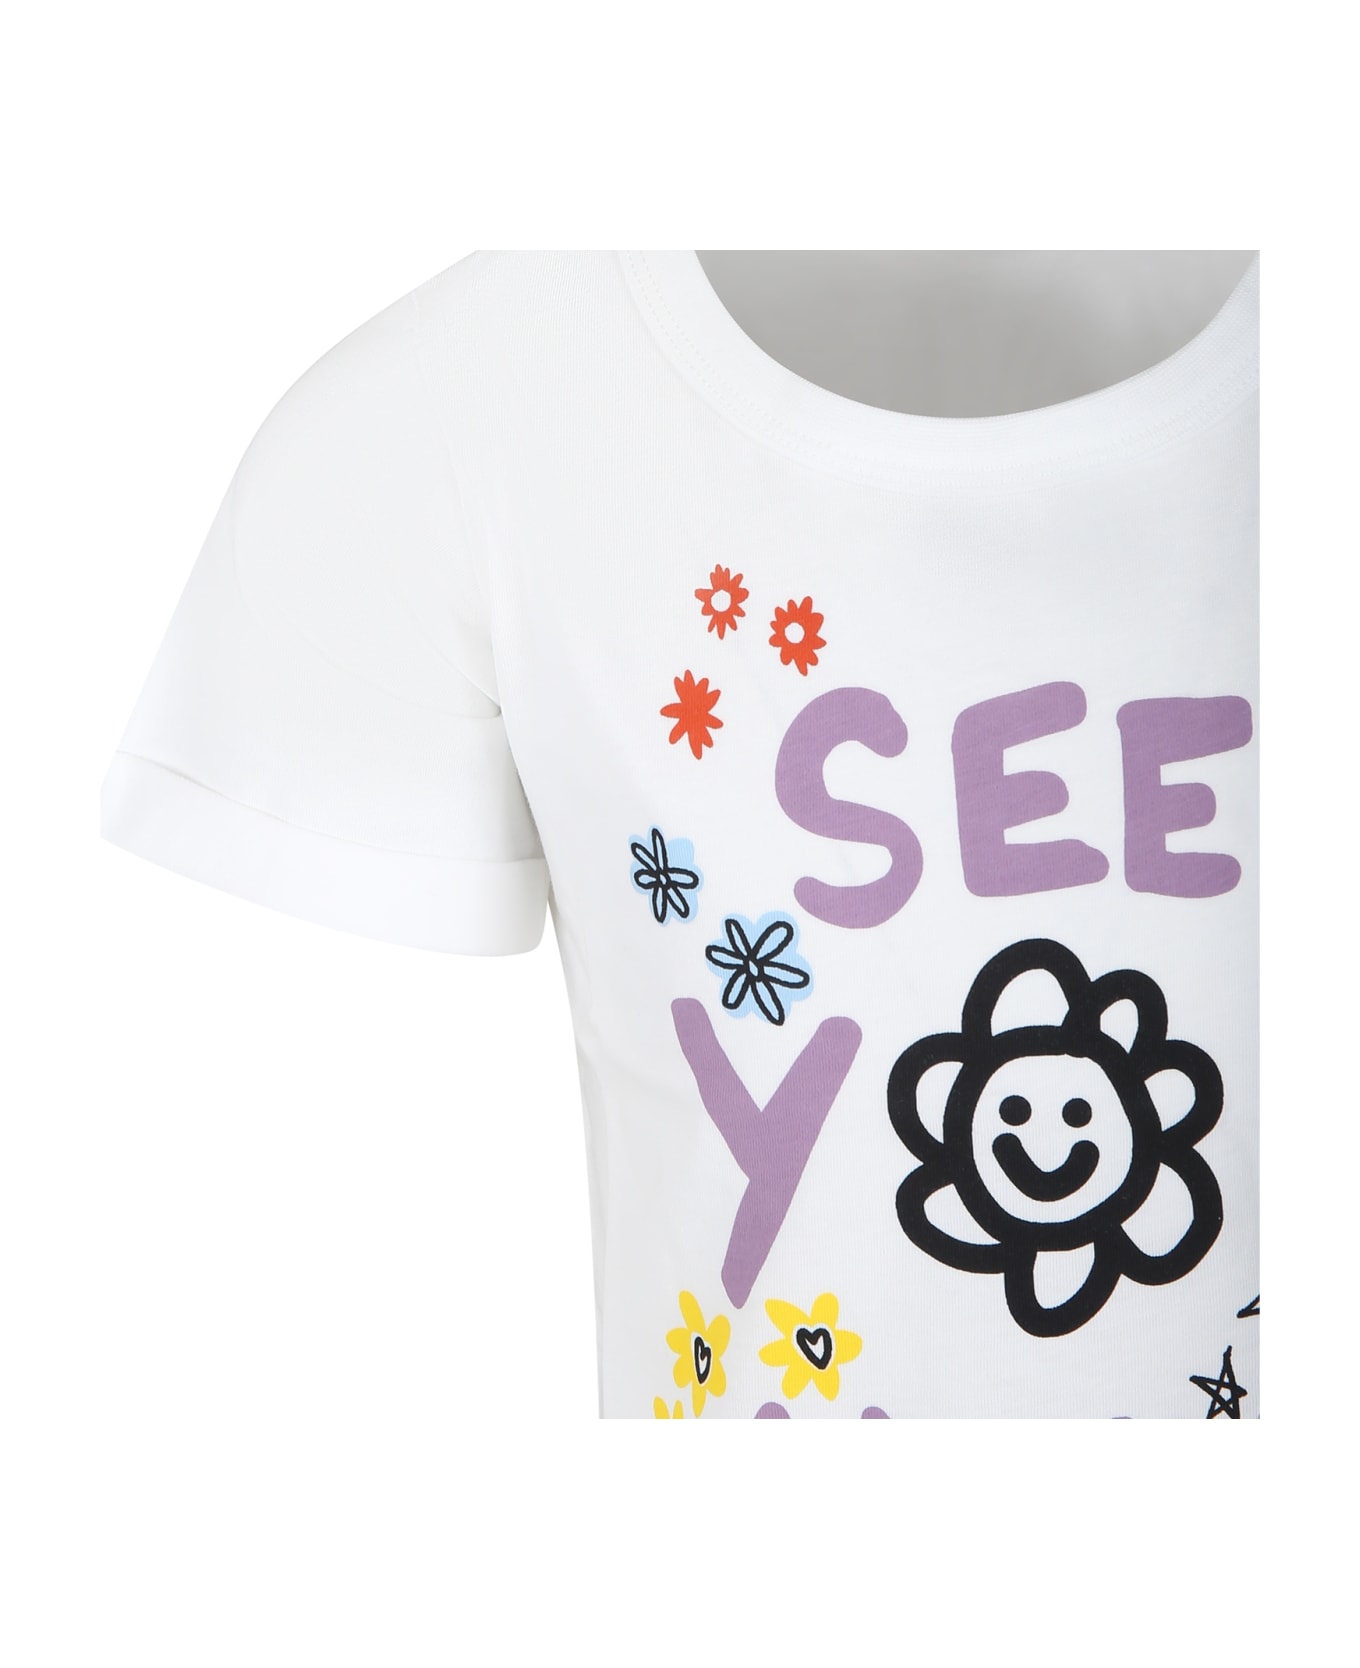 Stella McCartney Kids Ivory T-shirt For Girl With Flower Print And Writing - Ivory